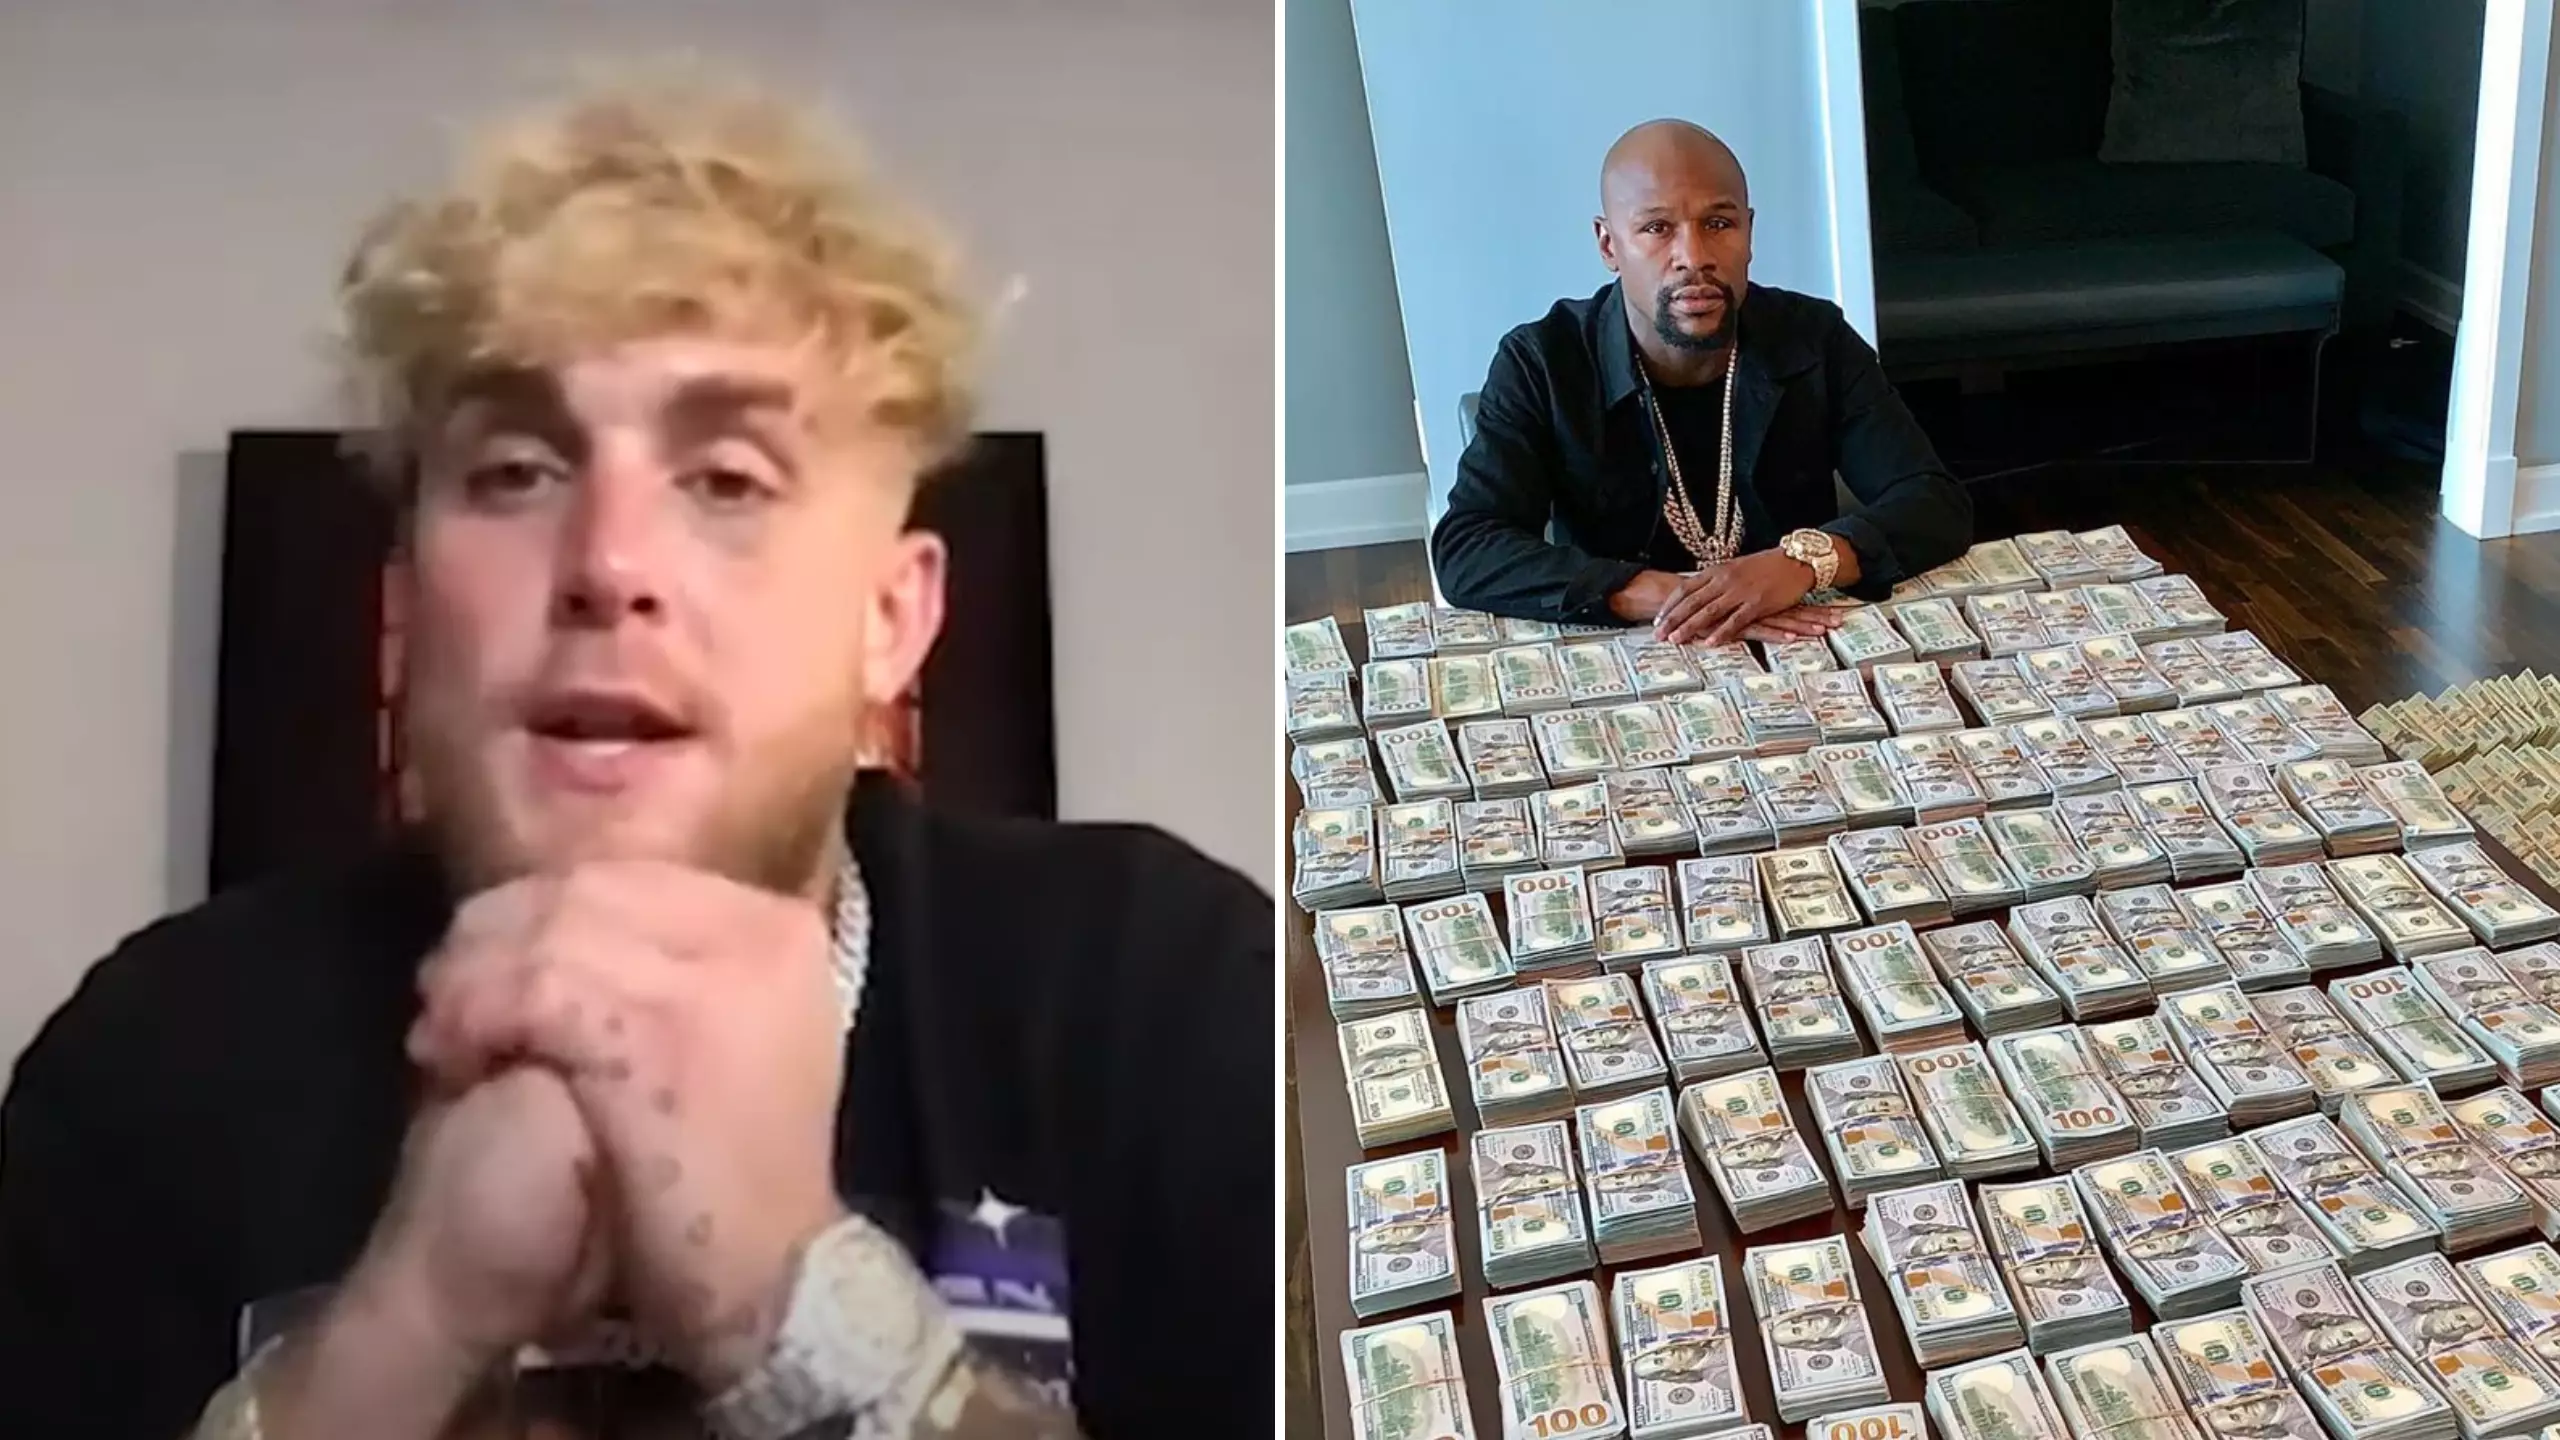 Jake Paul Claims Floyd Mayweather Is 'Out Of Pocket' And 'Afraid' To Lose His 50-0 Boxing Record